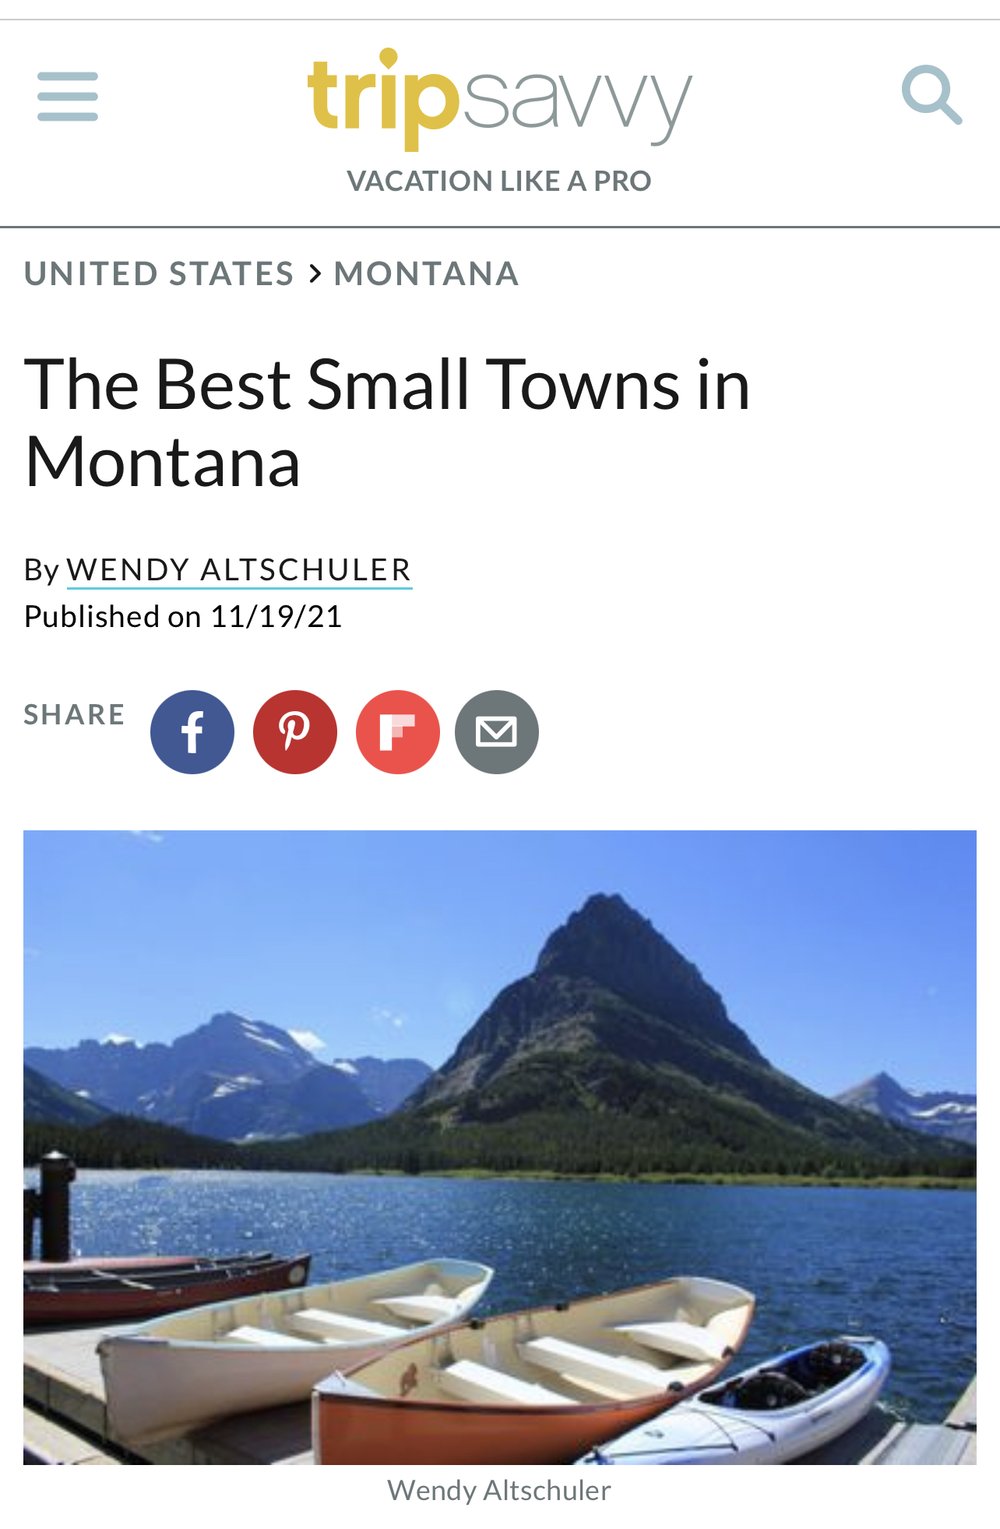 The Best Small Towns in Montana